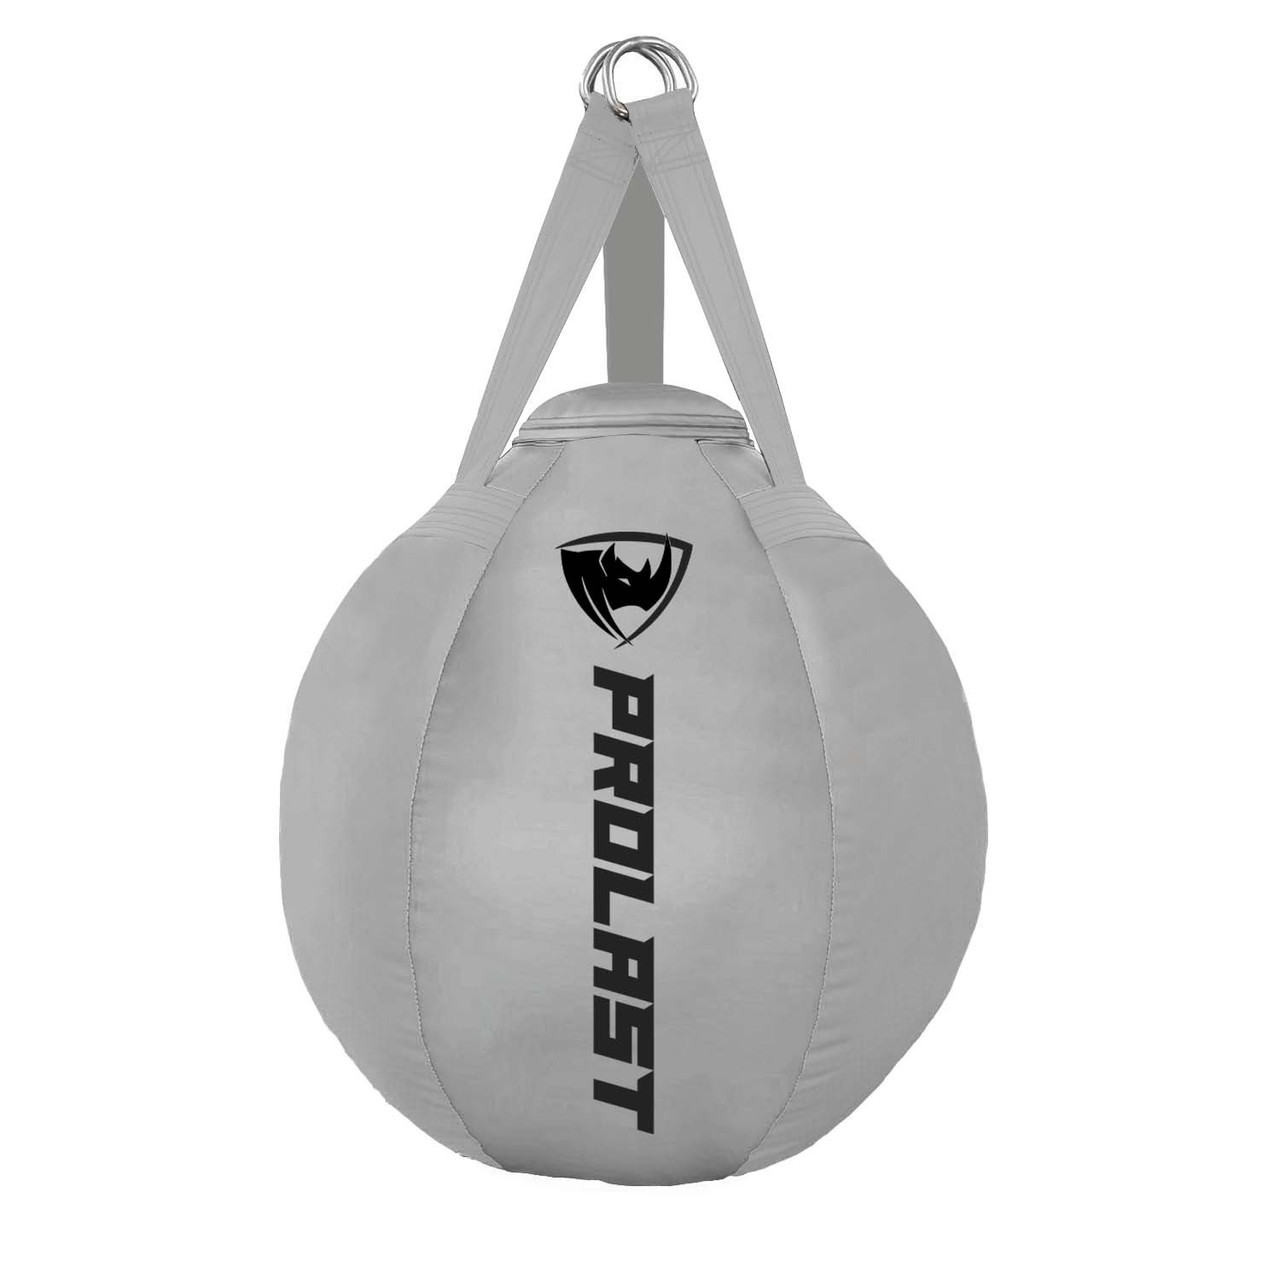 70lb Wrecking Ball Round Heavy Bag Gray Made in USA